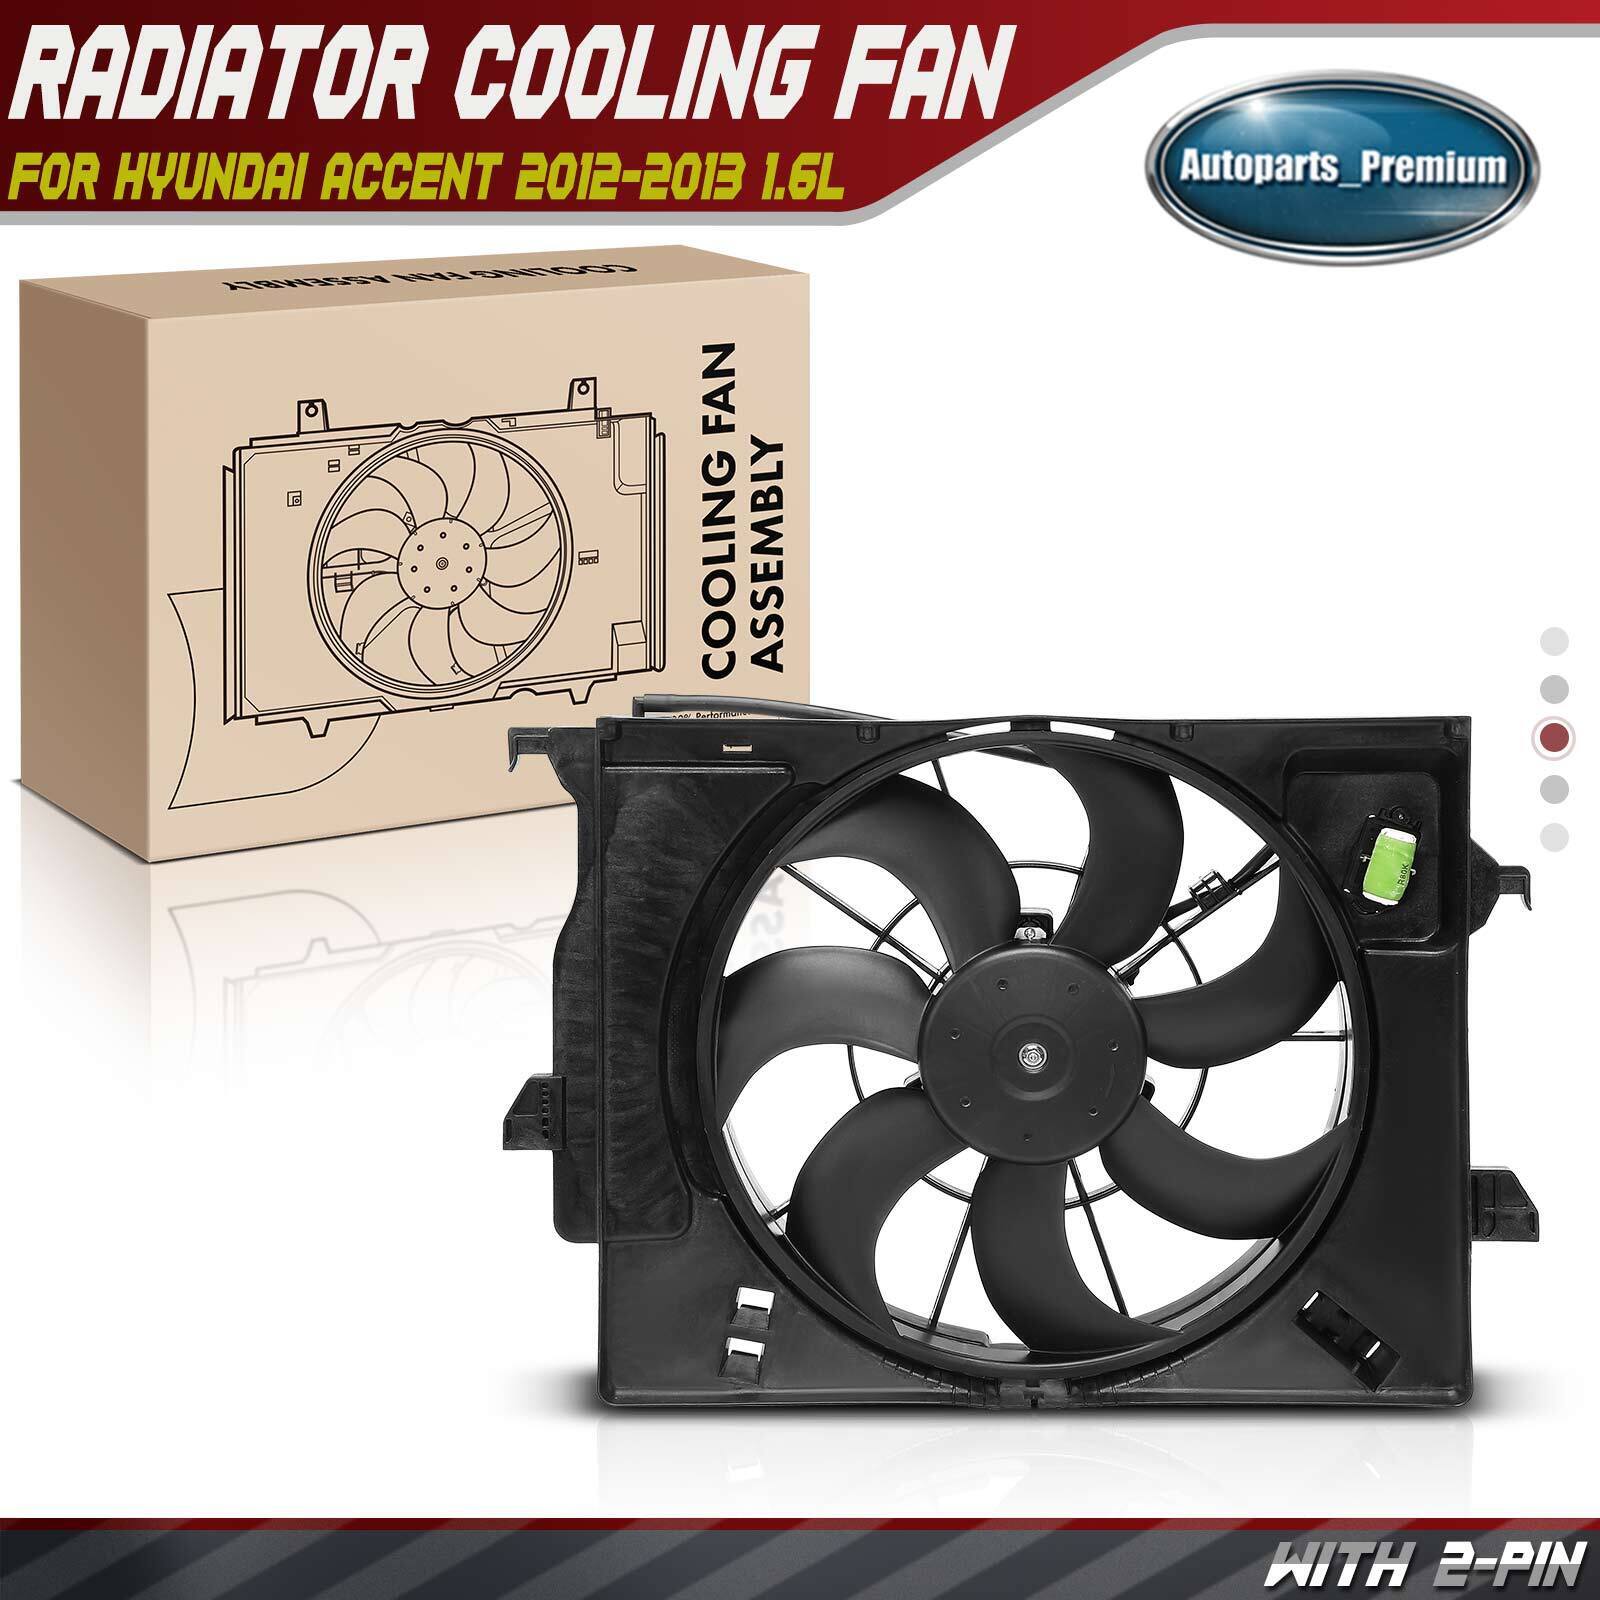 Engine Radiator Cooling Fan w/ Shroud Assembly for Hyundai Accent 2012-2013 1.6L